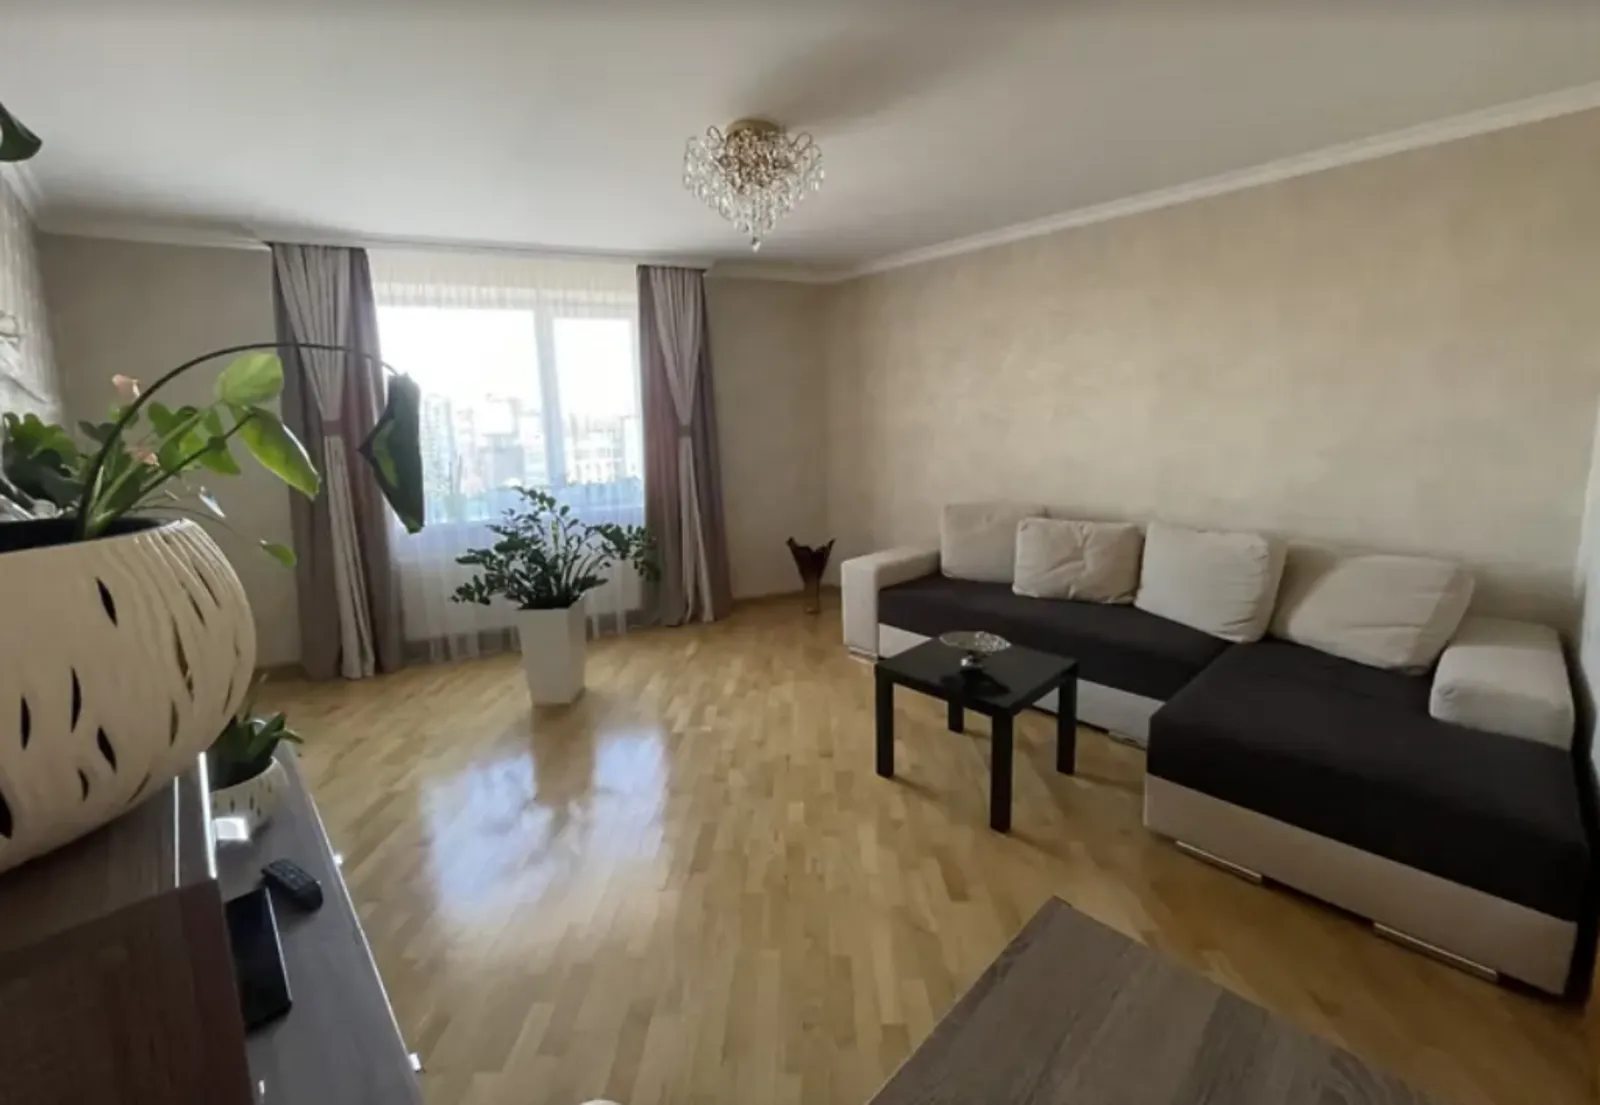 Apartments for sale. 3 rooms, 89 m², 9th floor/10 floors. Vostochnyy, Ternopil. 